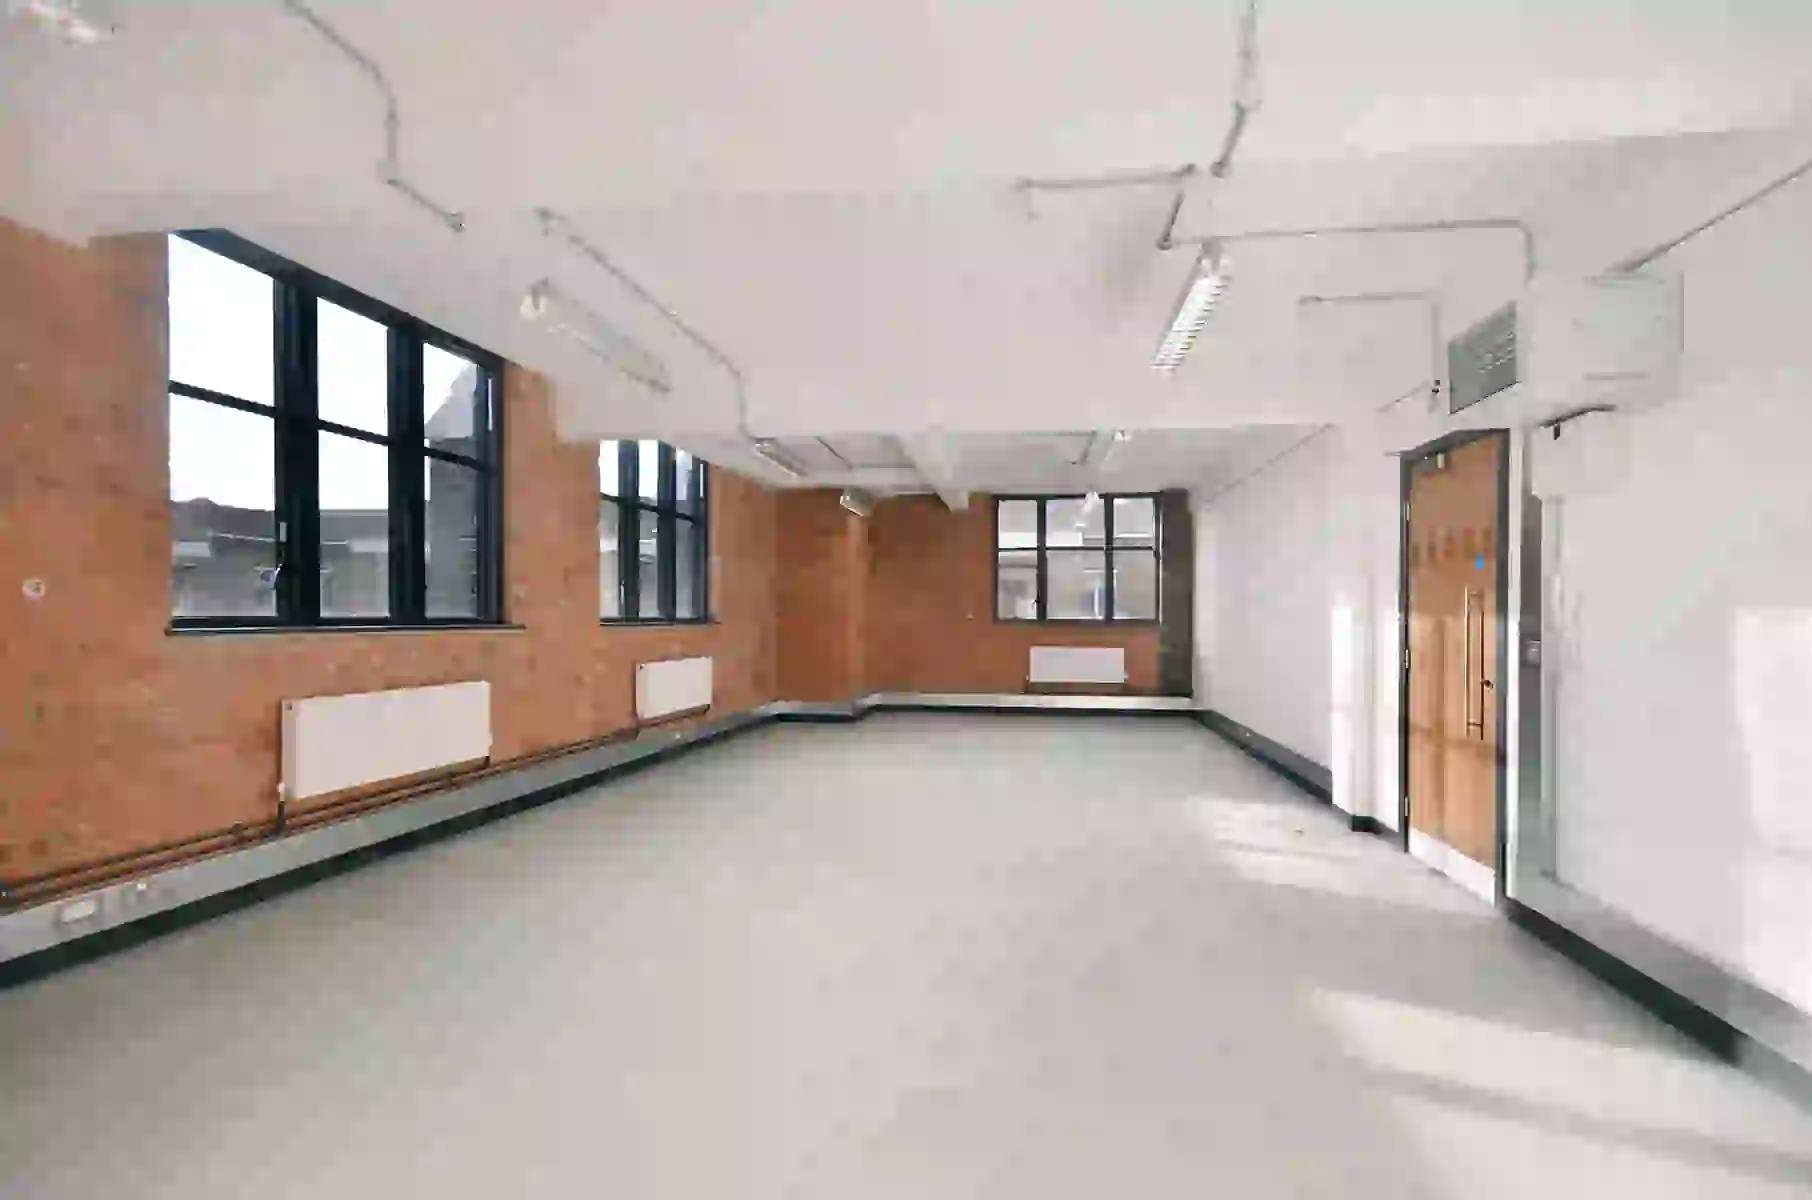 Office space to rent at Pill Box, 115 Coventry Road, Bethnal Green, London, unit PB.311, 637 sq ft (59 sq m).